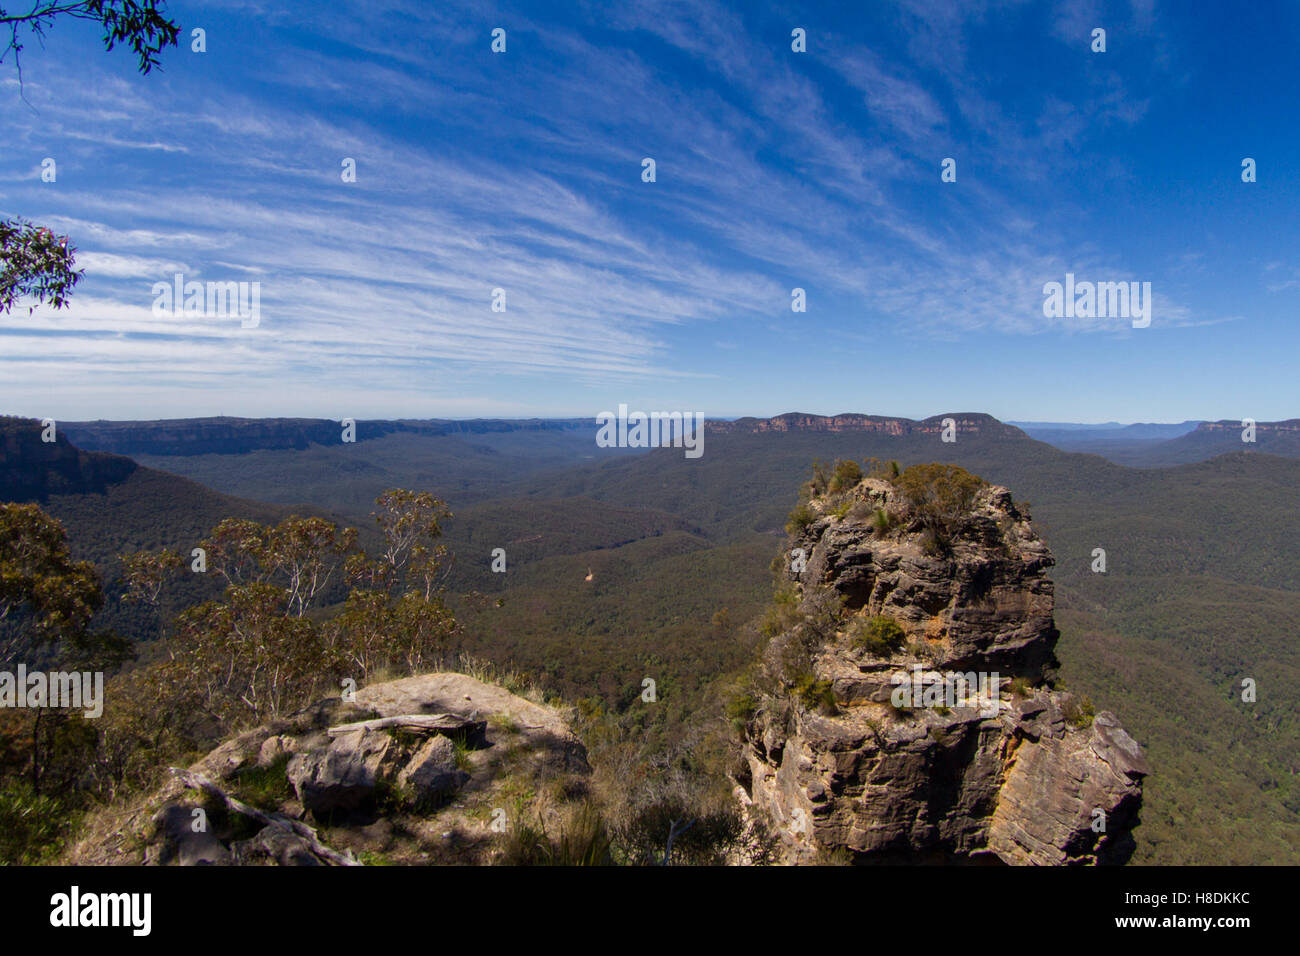 (161111) -- SYDNEY, Nov. 11, 2016 (Xinhua) -- Photo taken on Oct. 25, 2016 shows the Blue Mountains National Park in New South Wales state, Australia. Four percent of Australia's continent is protected for conservation, encompassed within just over 500 national parks, or some 28 million hectares of land. Most national parks are managed by Australia's state and territory governments -- states are responsible for land management under Australia's constitution -- though the Commonwealth Government looks after six national parks, the National Botanic Gardens and 58 individual marine reserves. (Xin Stock Photo